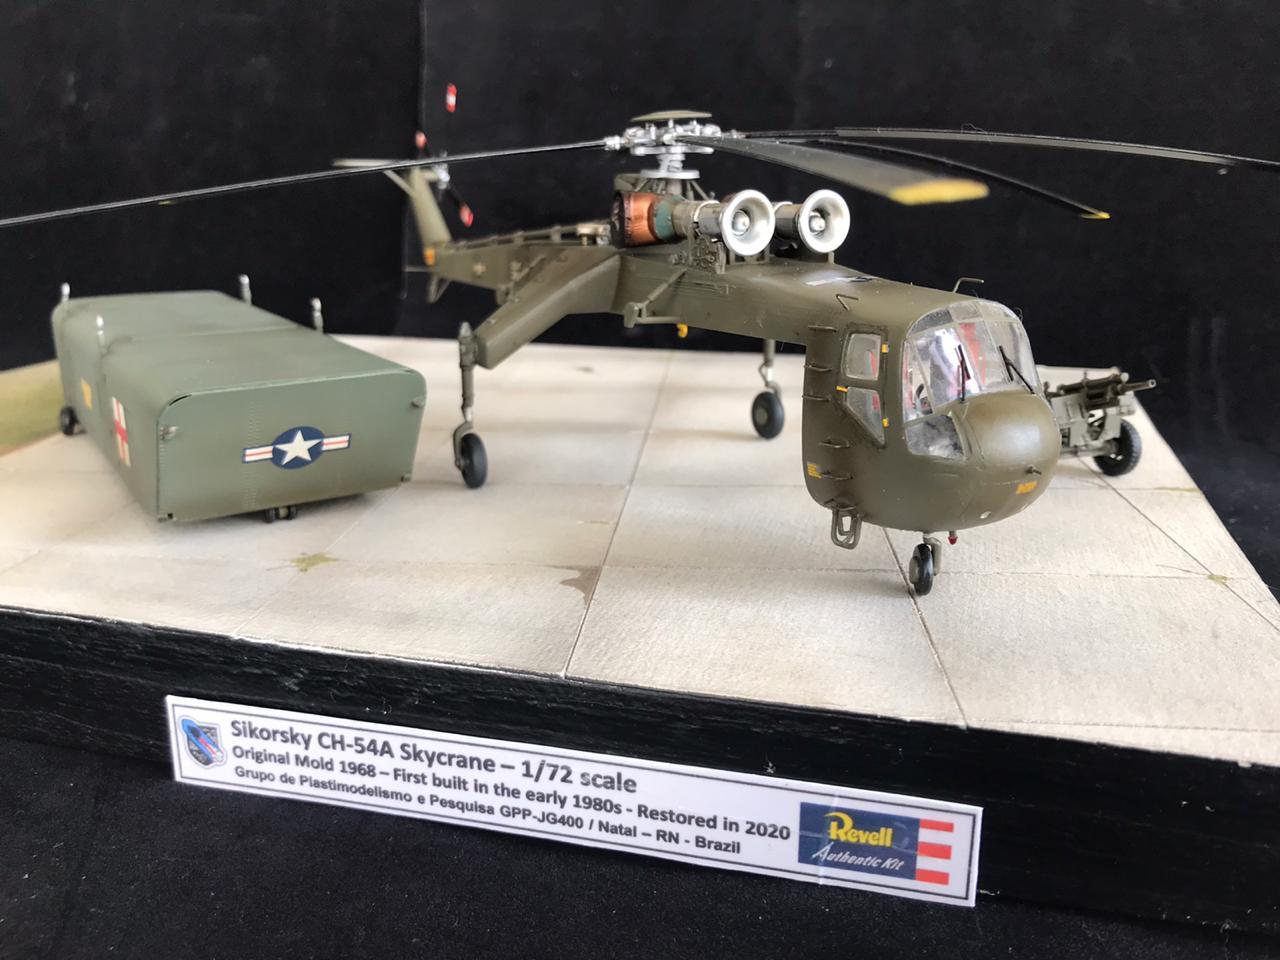 Die cast 1/72 Modellino Elicottero Helicopter Sikorsky CH-54A Skycrane Ambulance 